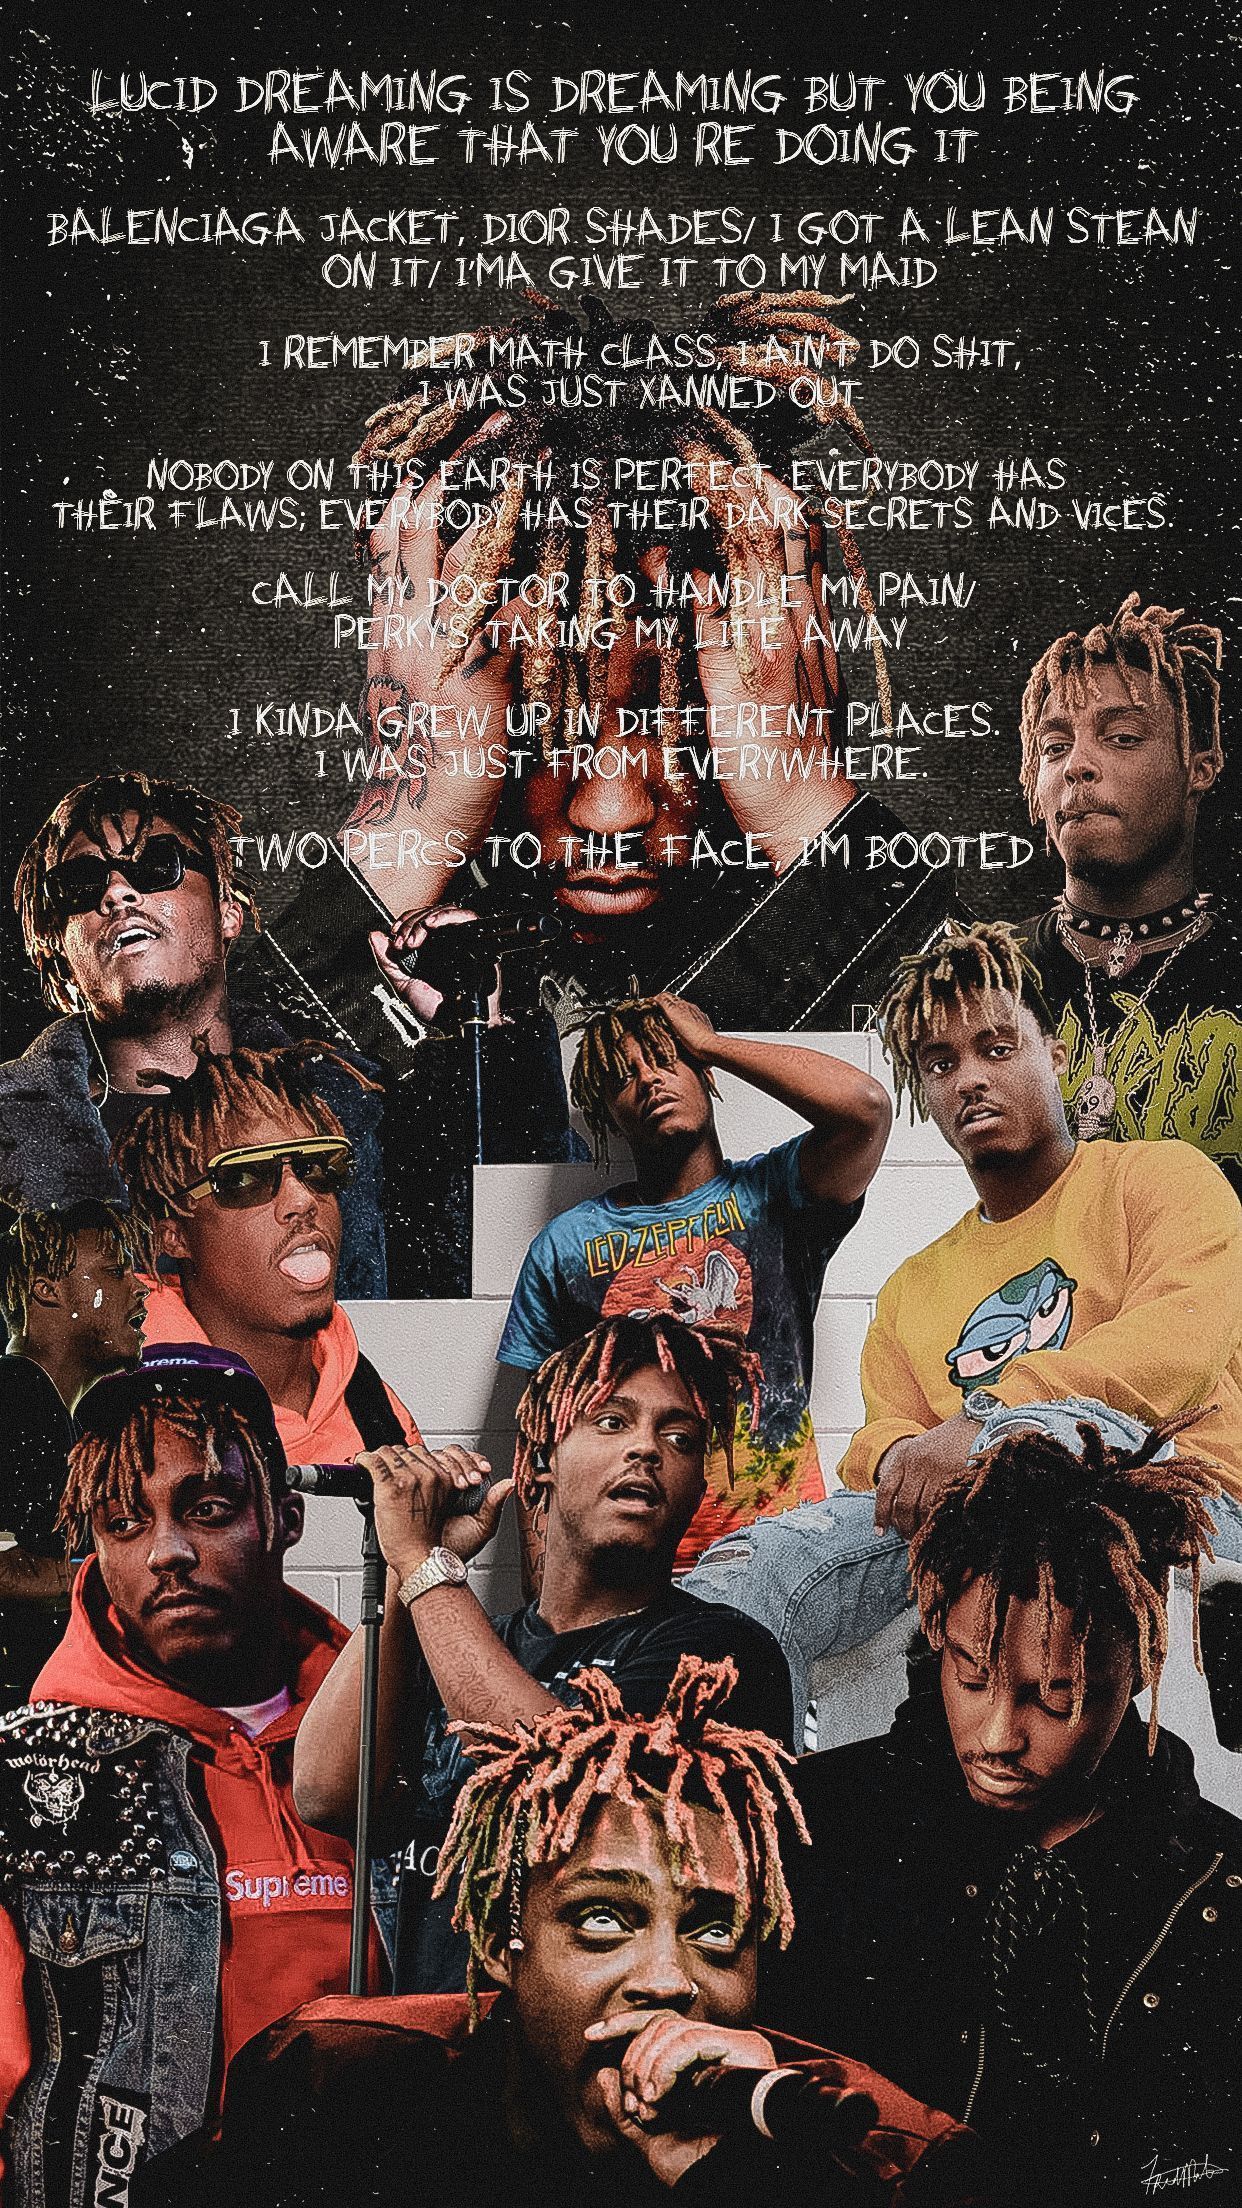 Juice WRLD For iPhone Wallpapers - Wallpaper Cave